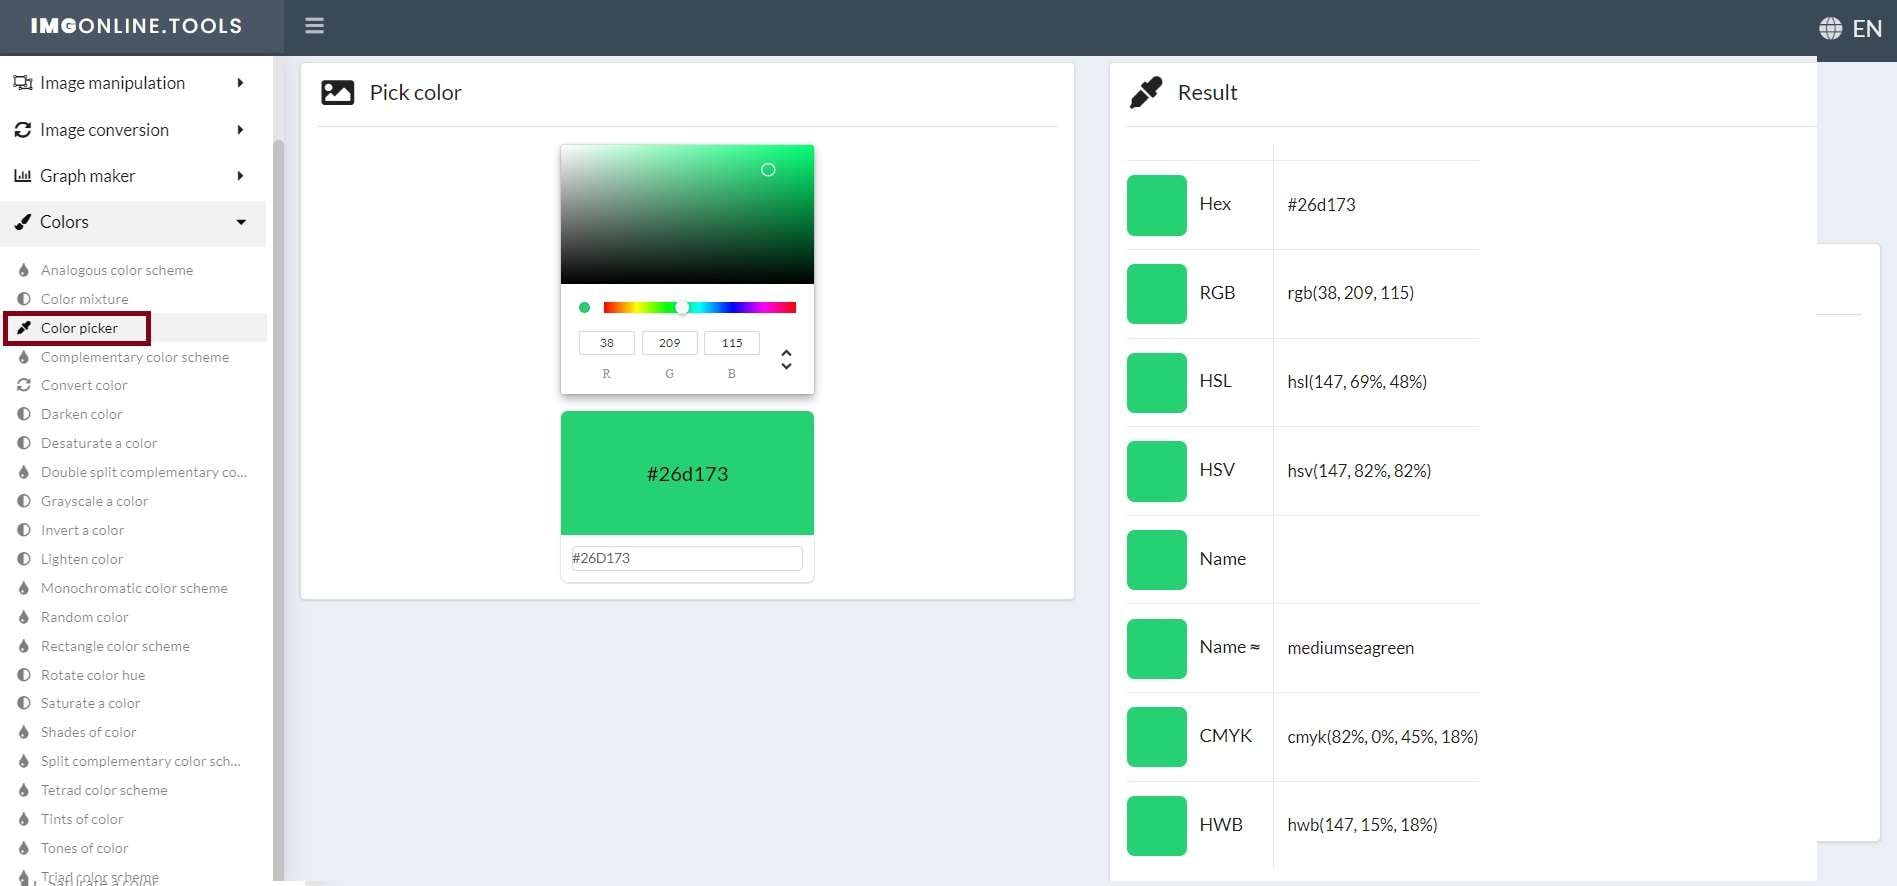 use color picker in imgonline tools